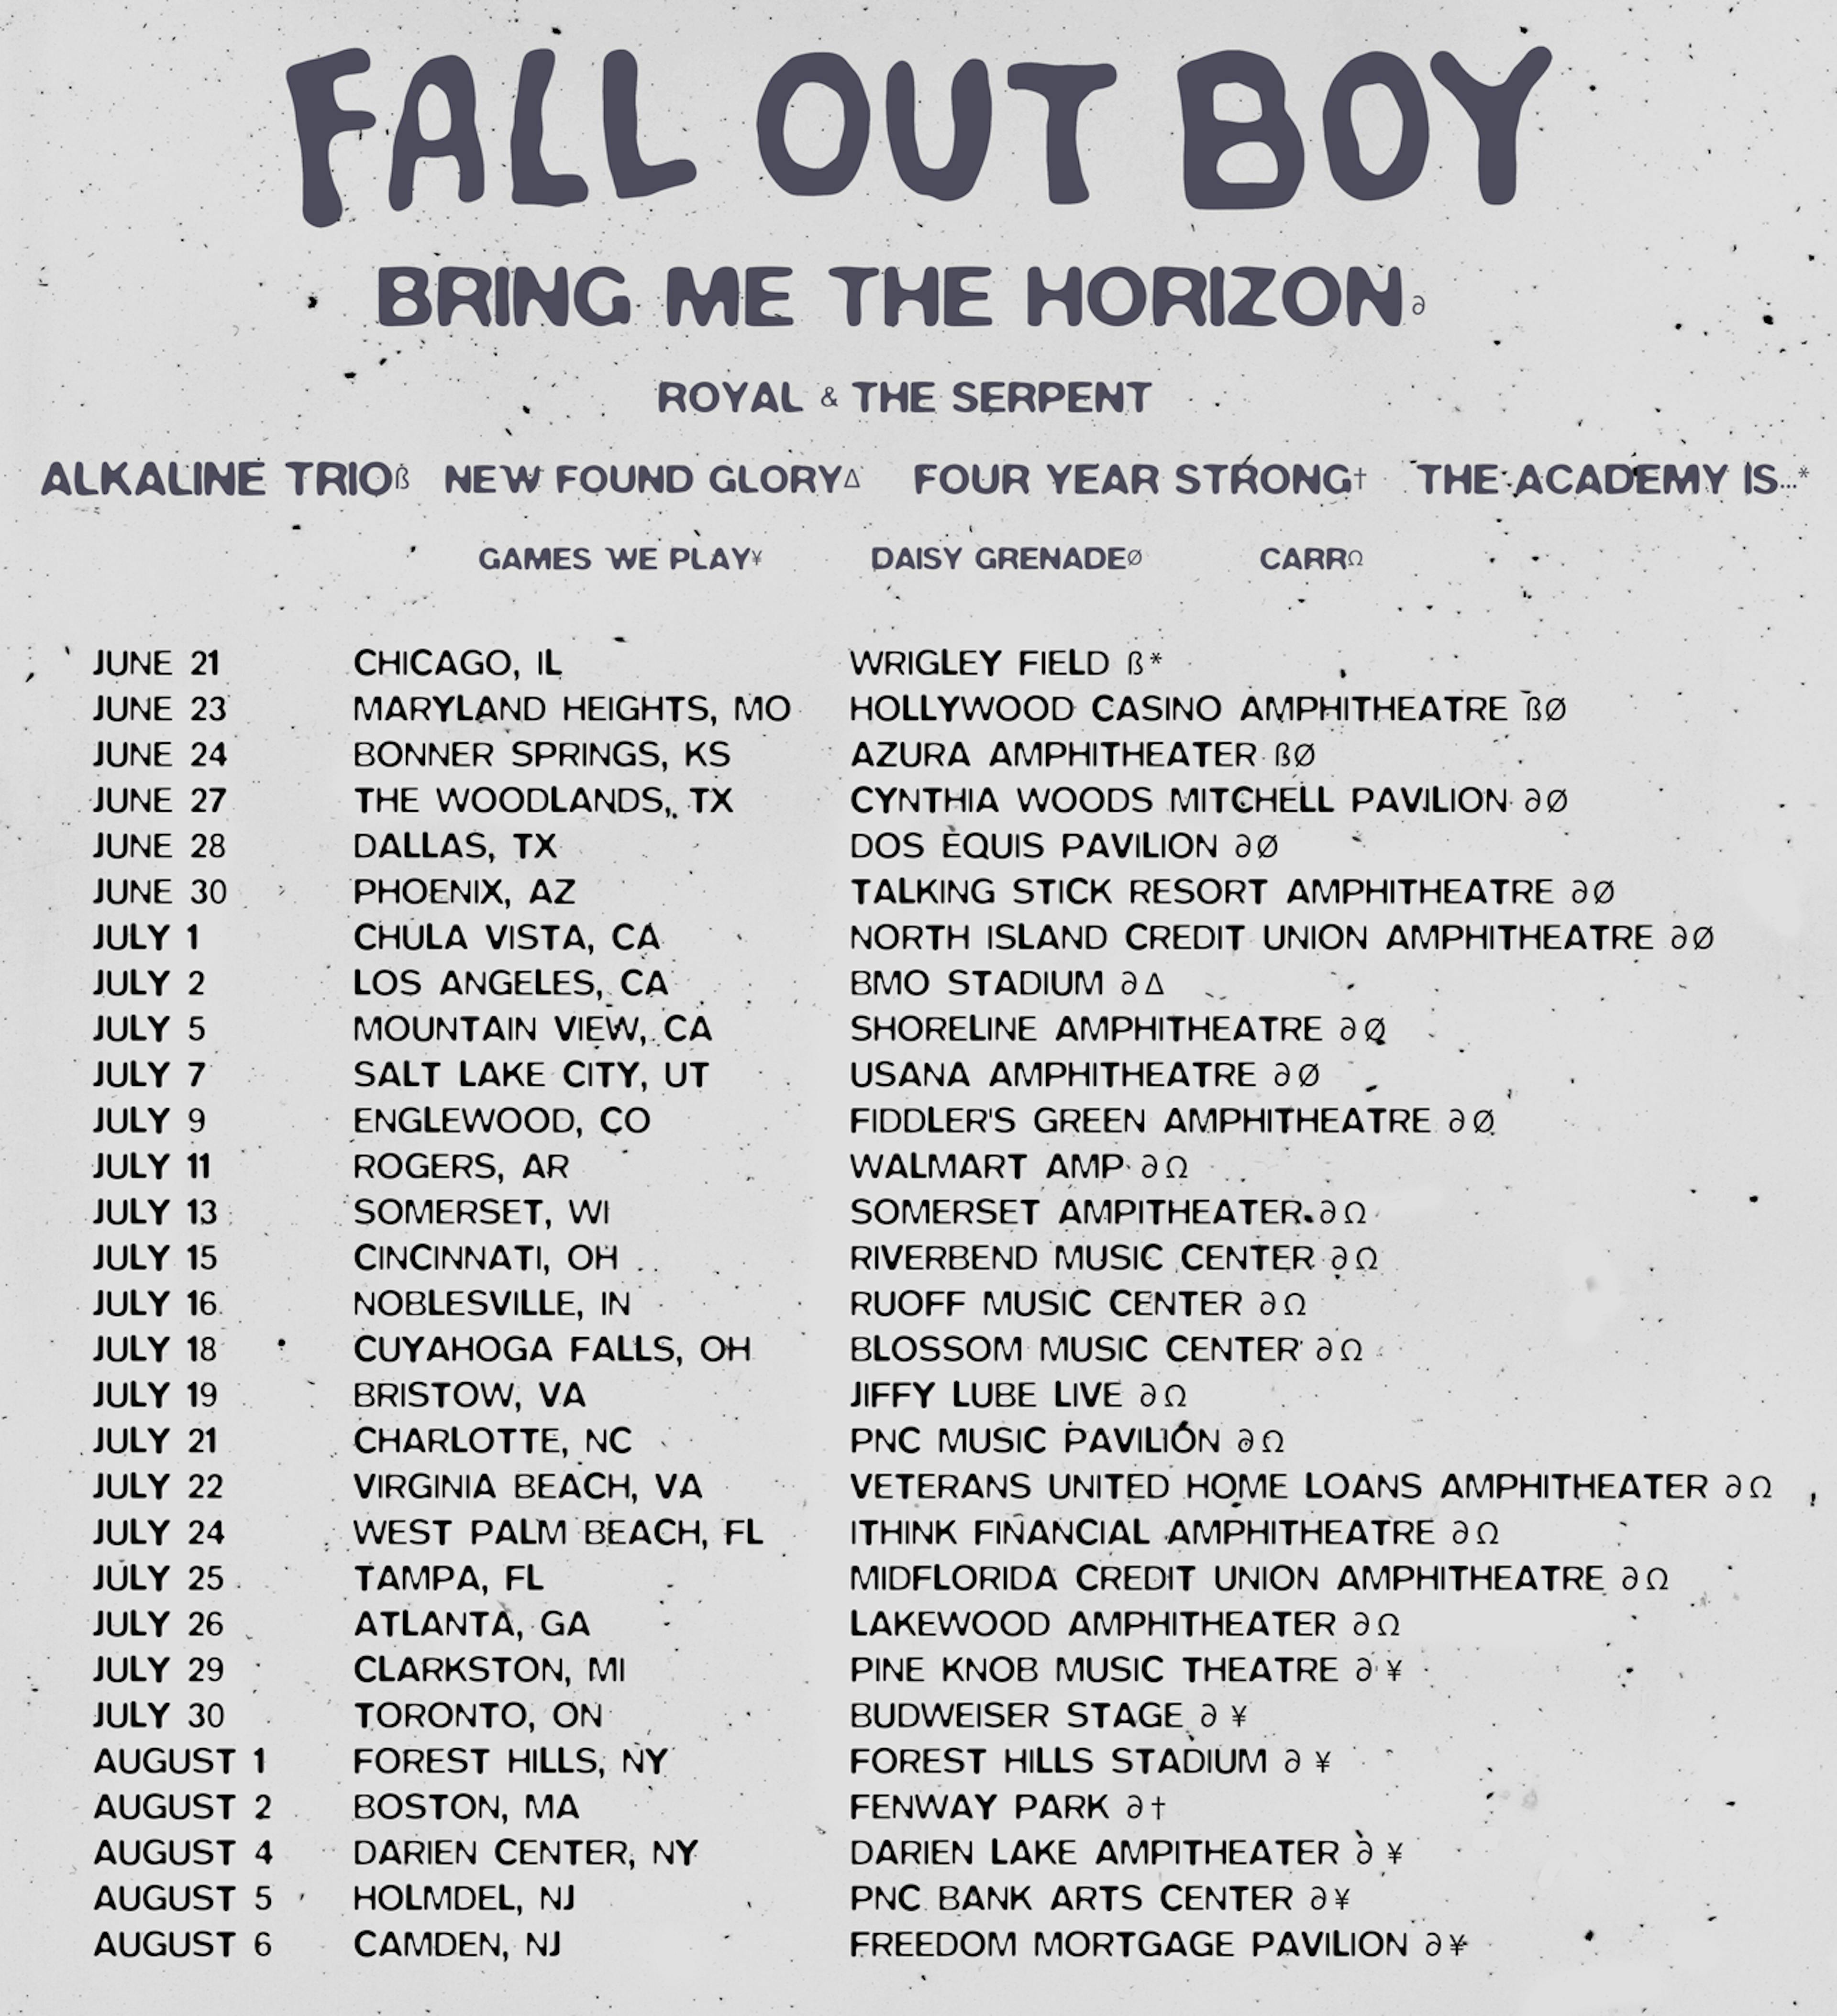 bring me the horizon tour with fall out boy